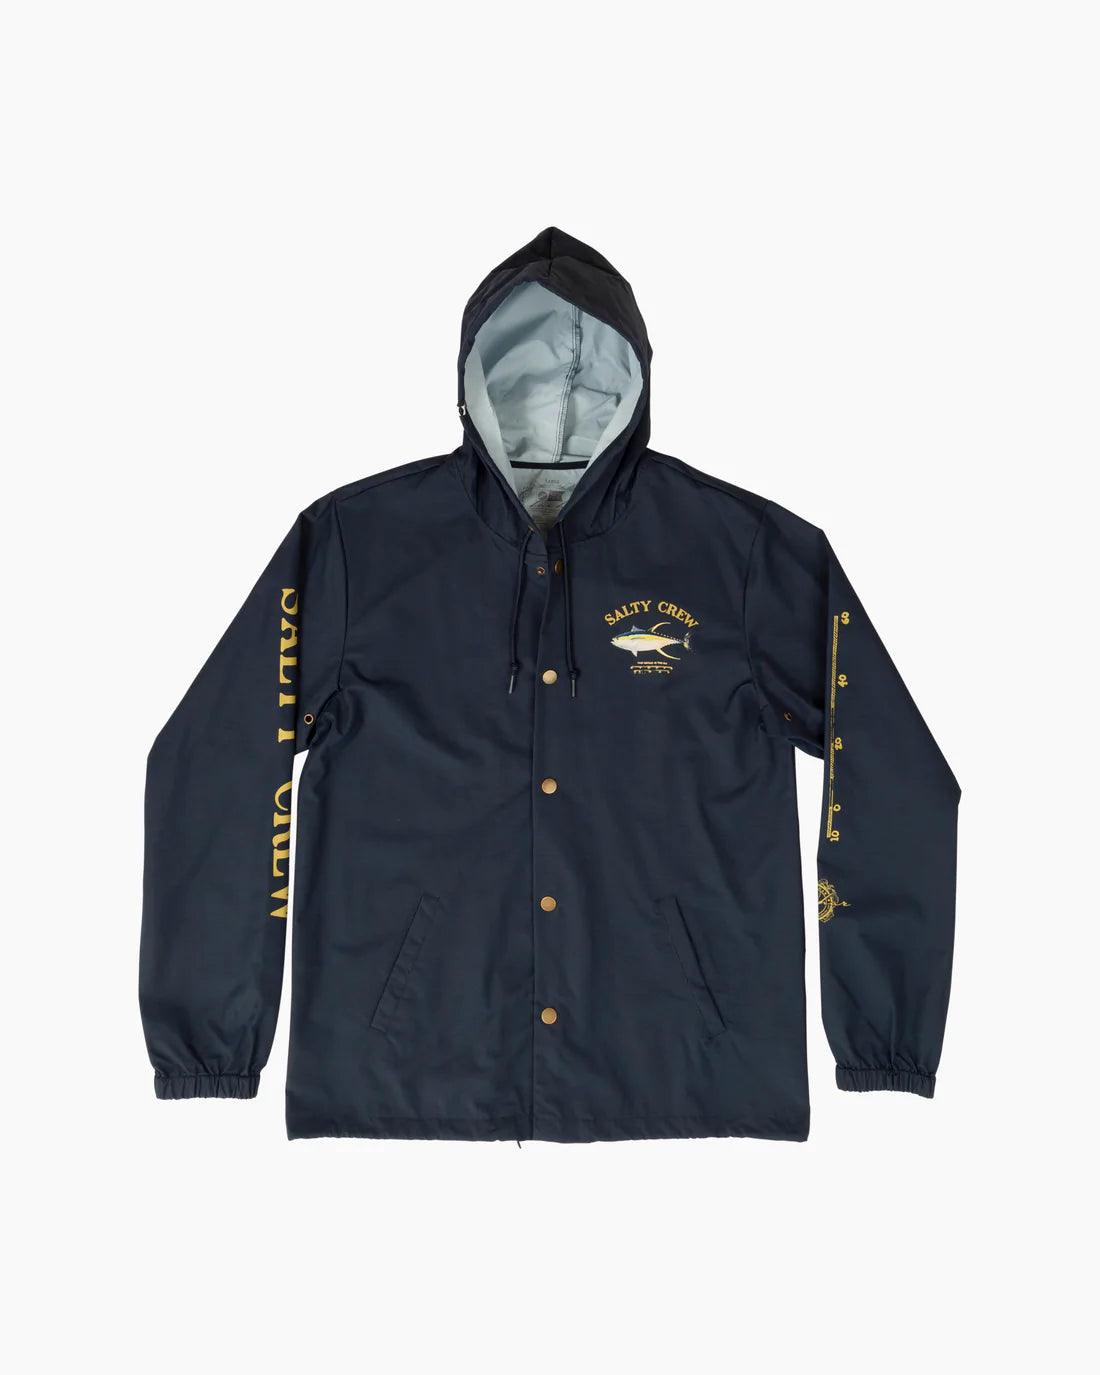 Ahi Mount Snap Jacket Navy - Purpose-Built / Home of the Trades